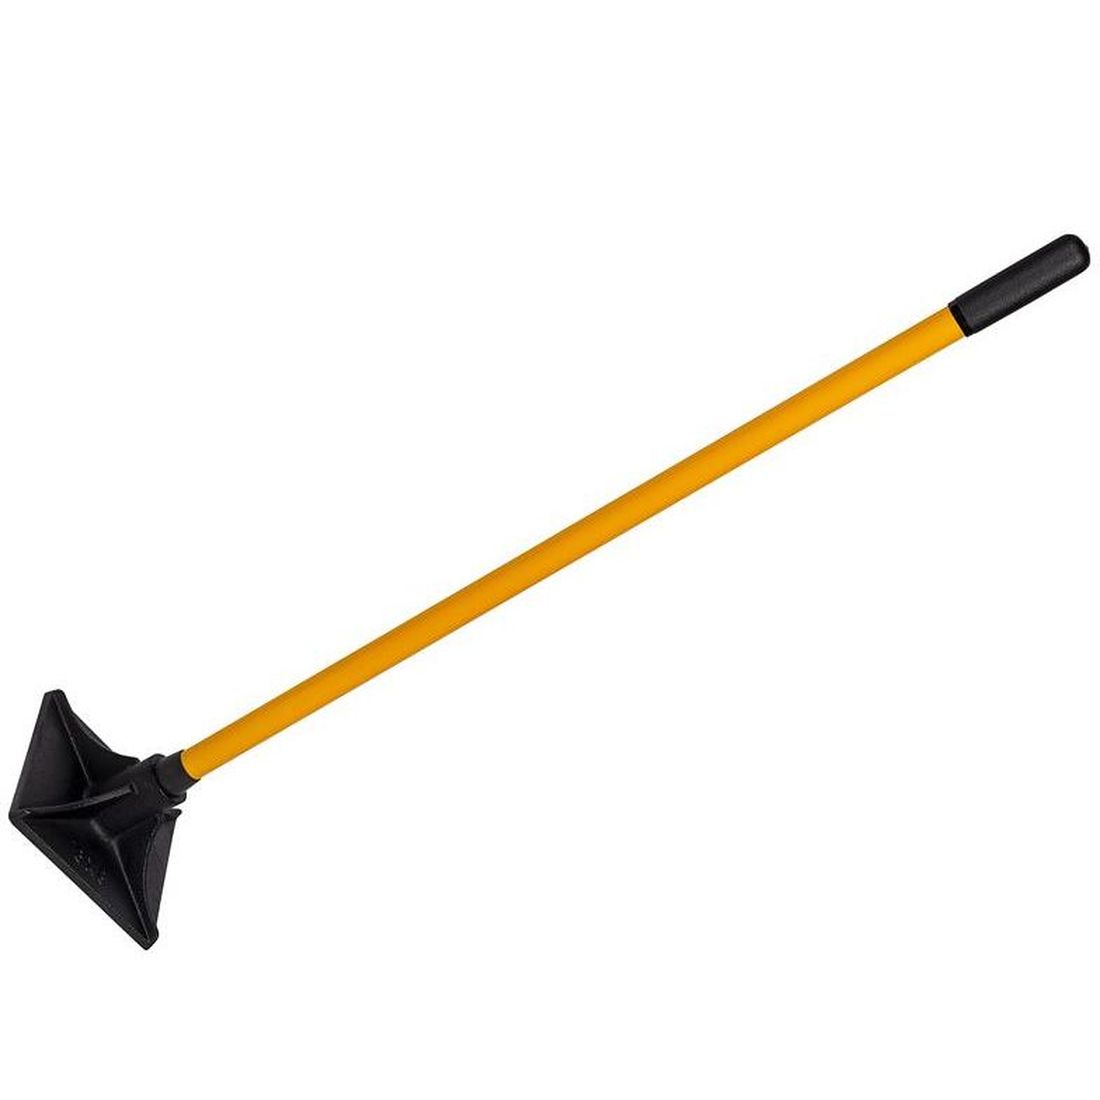 Roughneck 64-379 Earth Rammer (Tamper) with Fibreglass Handle 4.5kg (10 lb)               